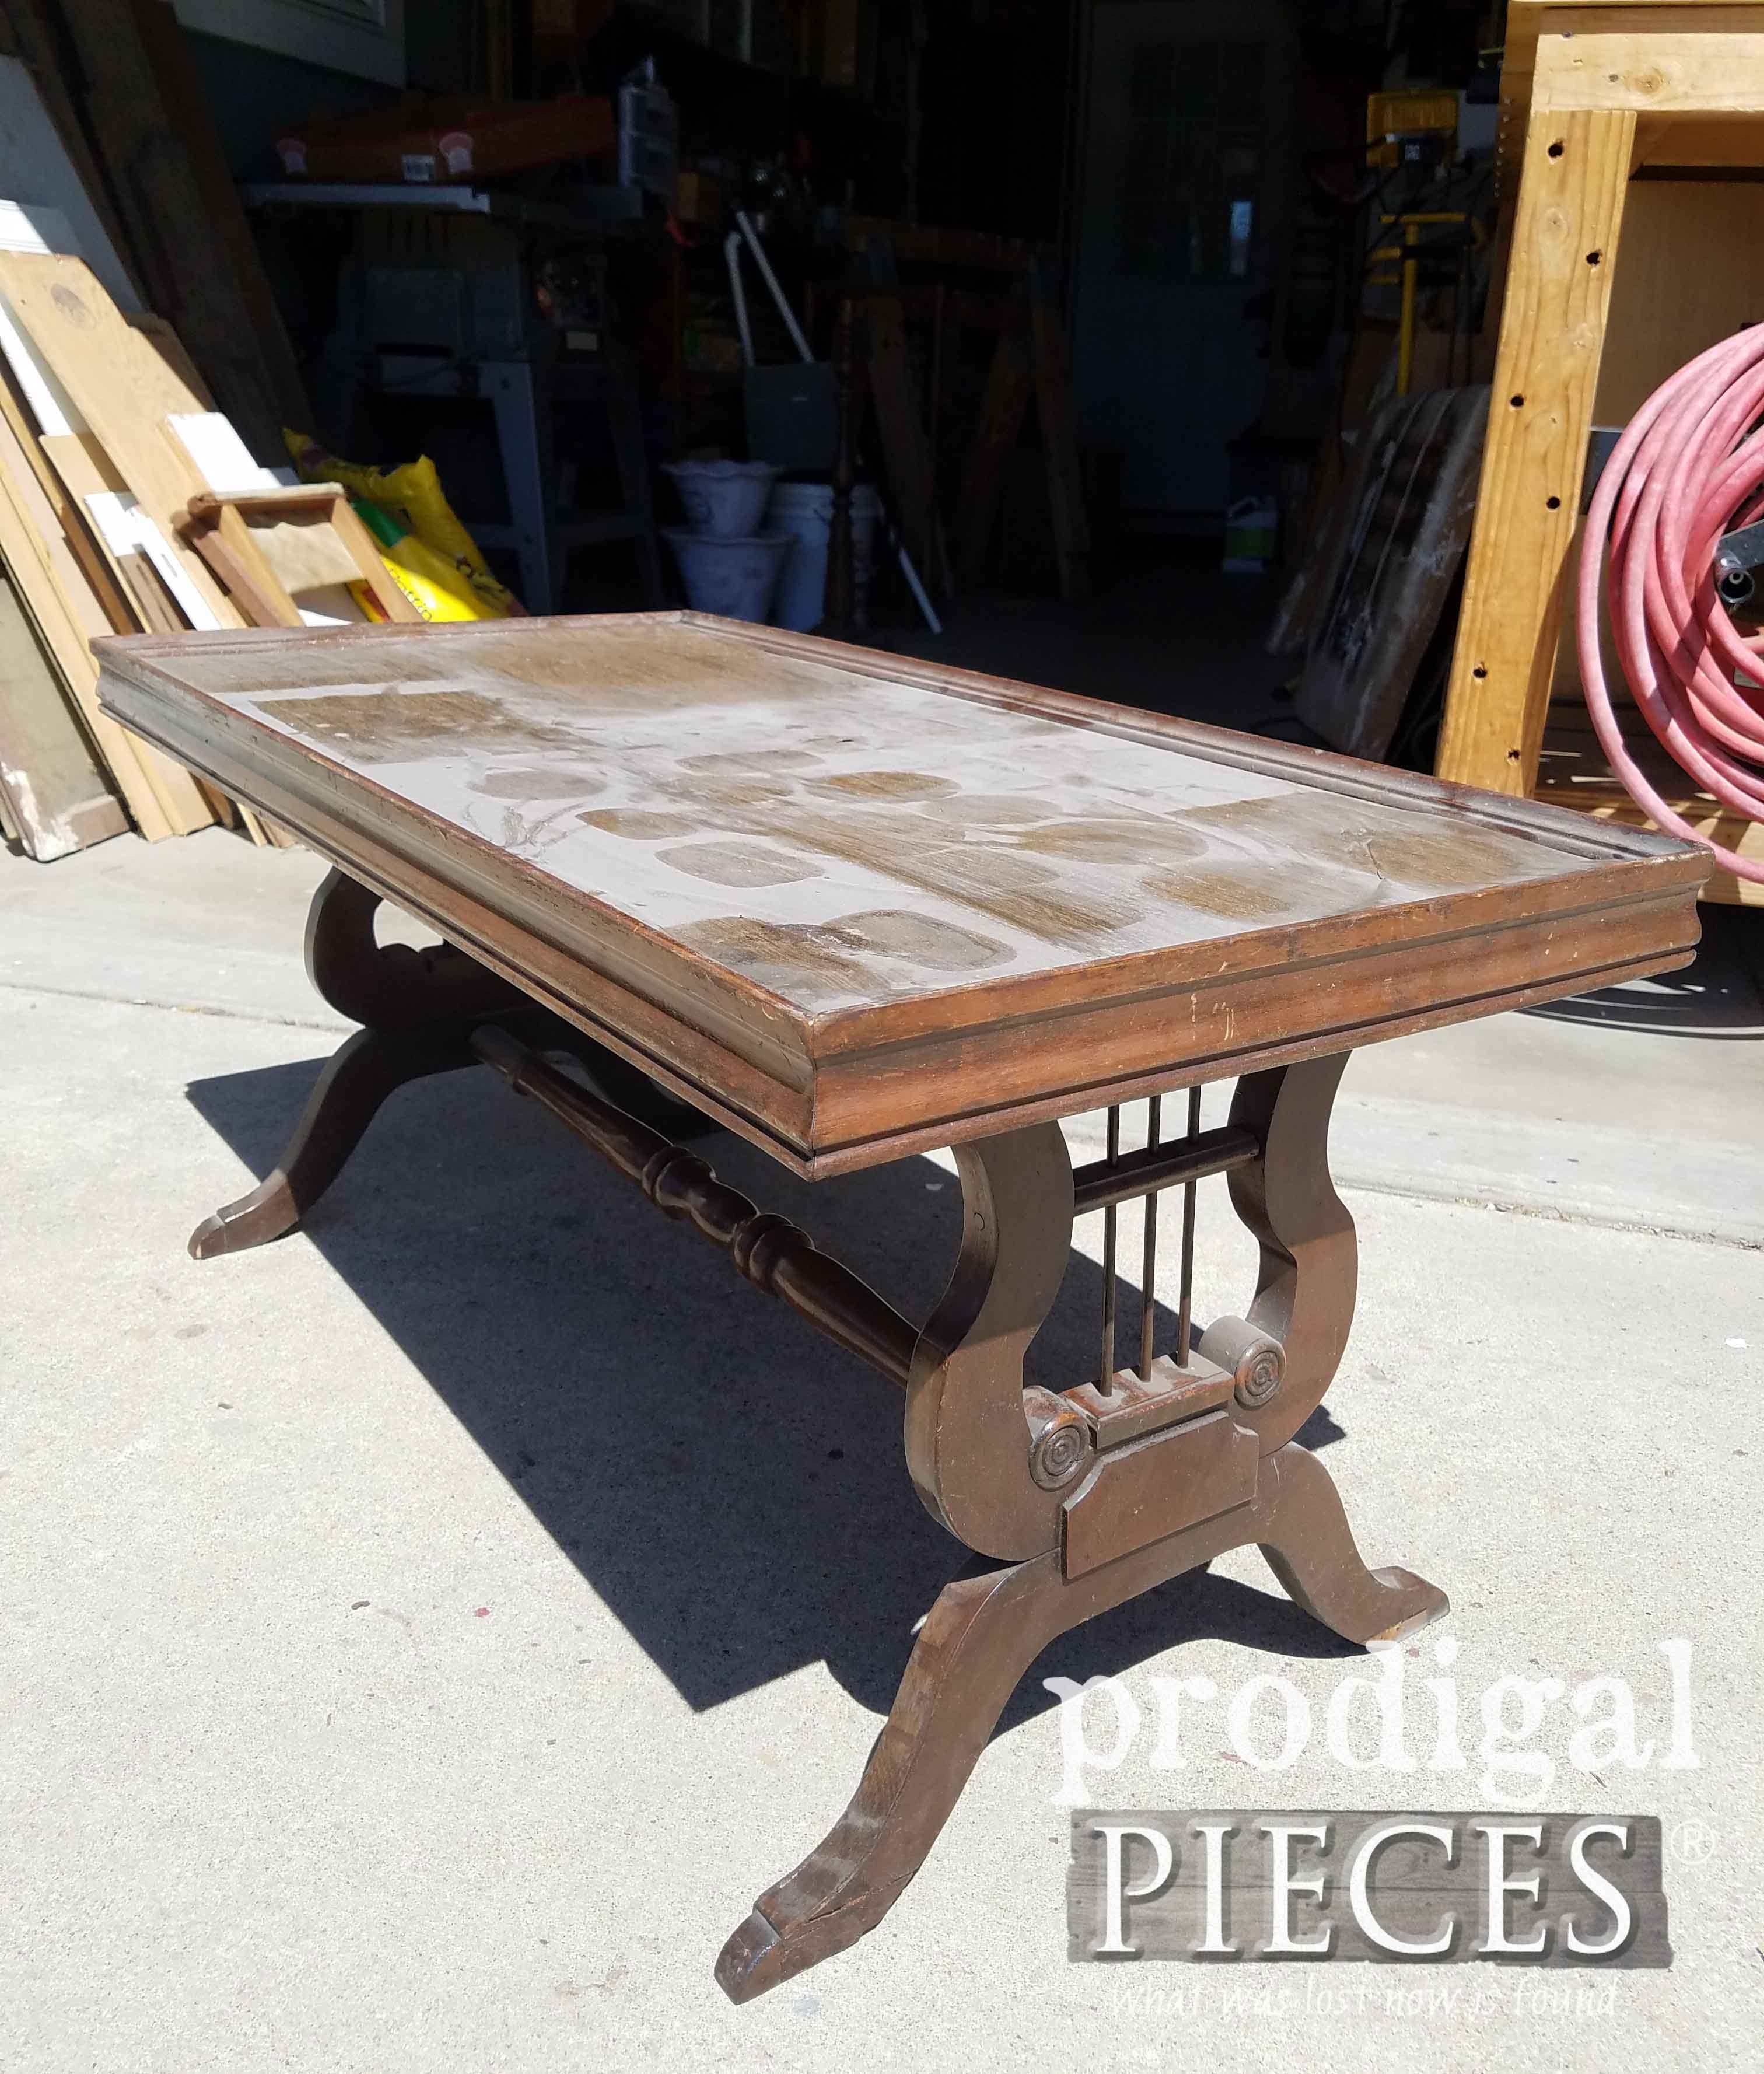 Vintage Lyre Coffee Table Before Makeover by Prodigal Pieces | prodigalpieces.com